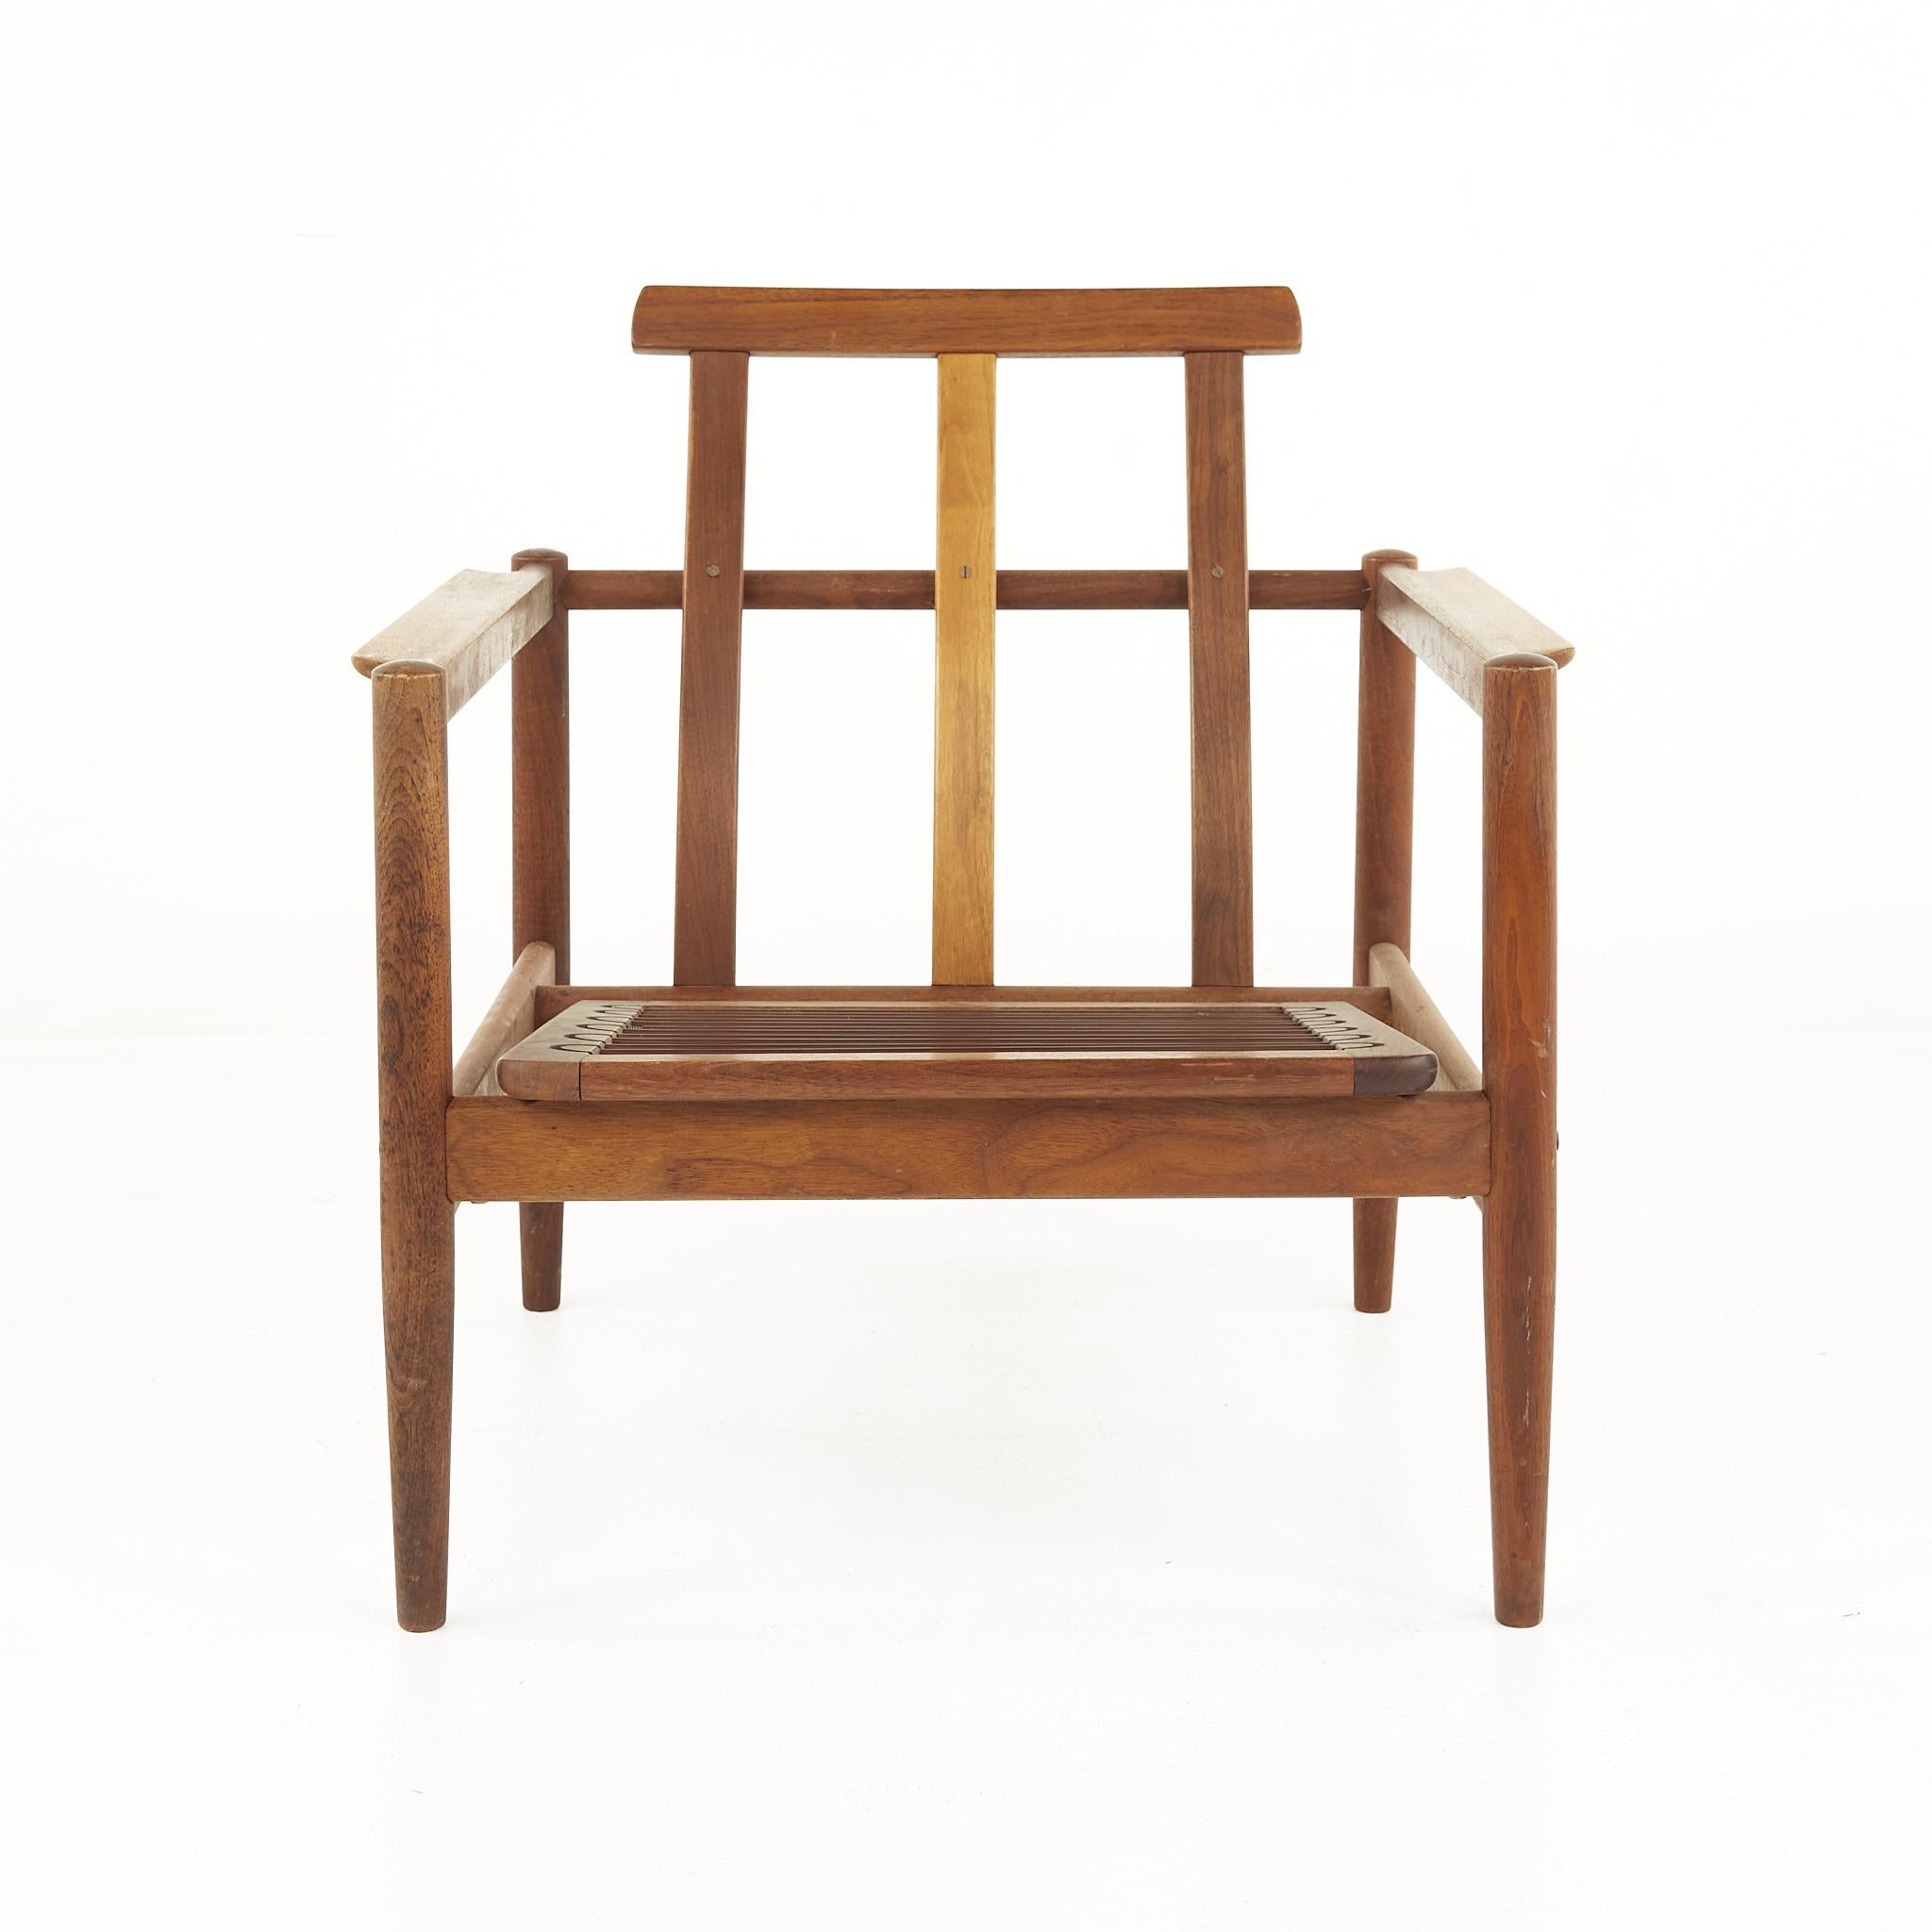 Borge Jensen Sonner for Bernstorffsminde Mobelfabrik Teak Lounge Chairs, a Pair In Good Condition For Sale In Countryside, IL